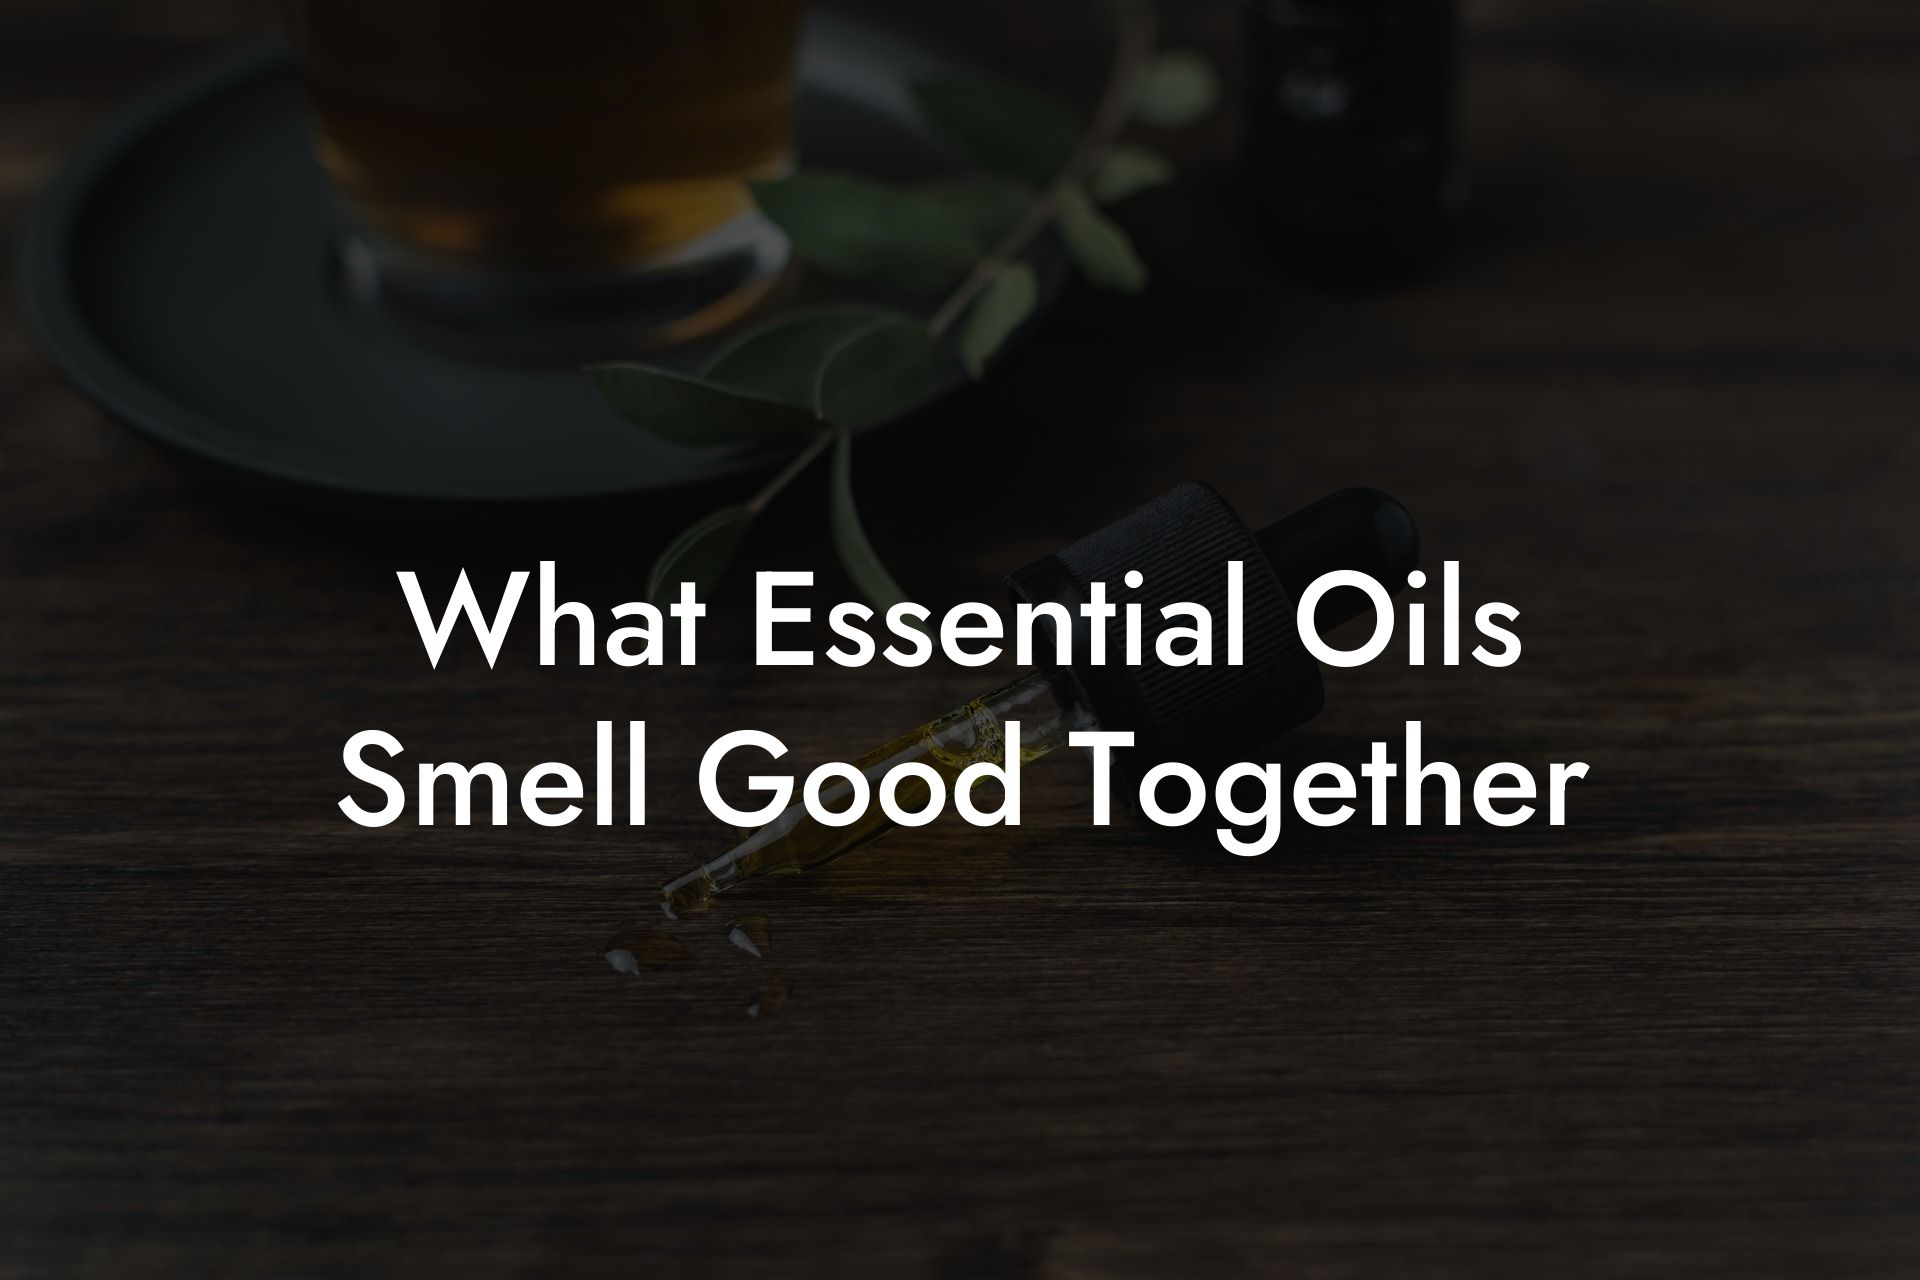 What Essential Oils Smell Good Together